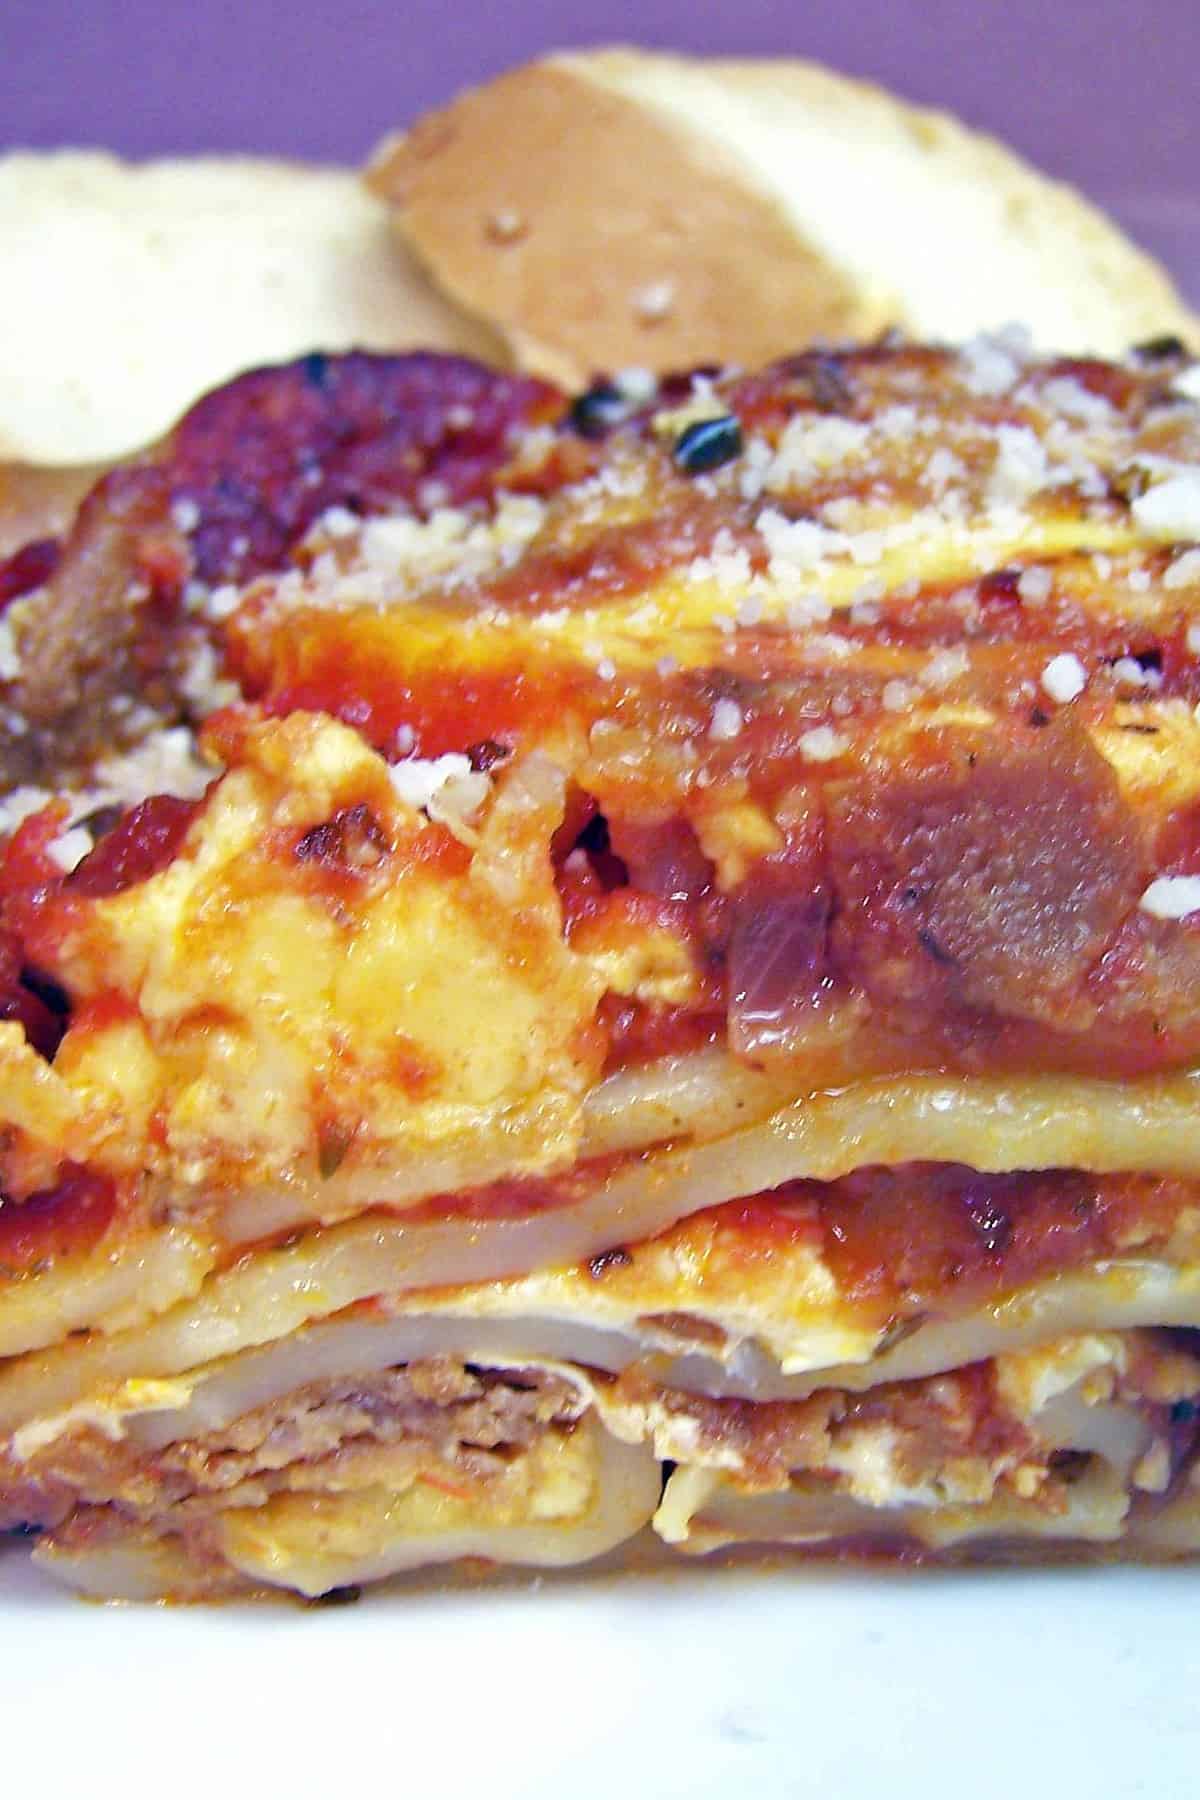 Cheese Steak-Yumm Lasagna With the Works!